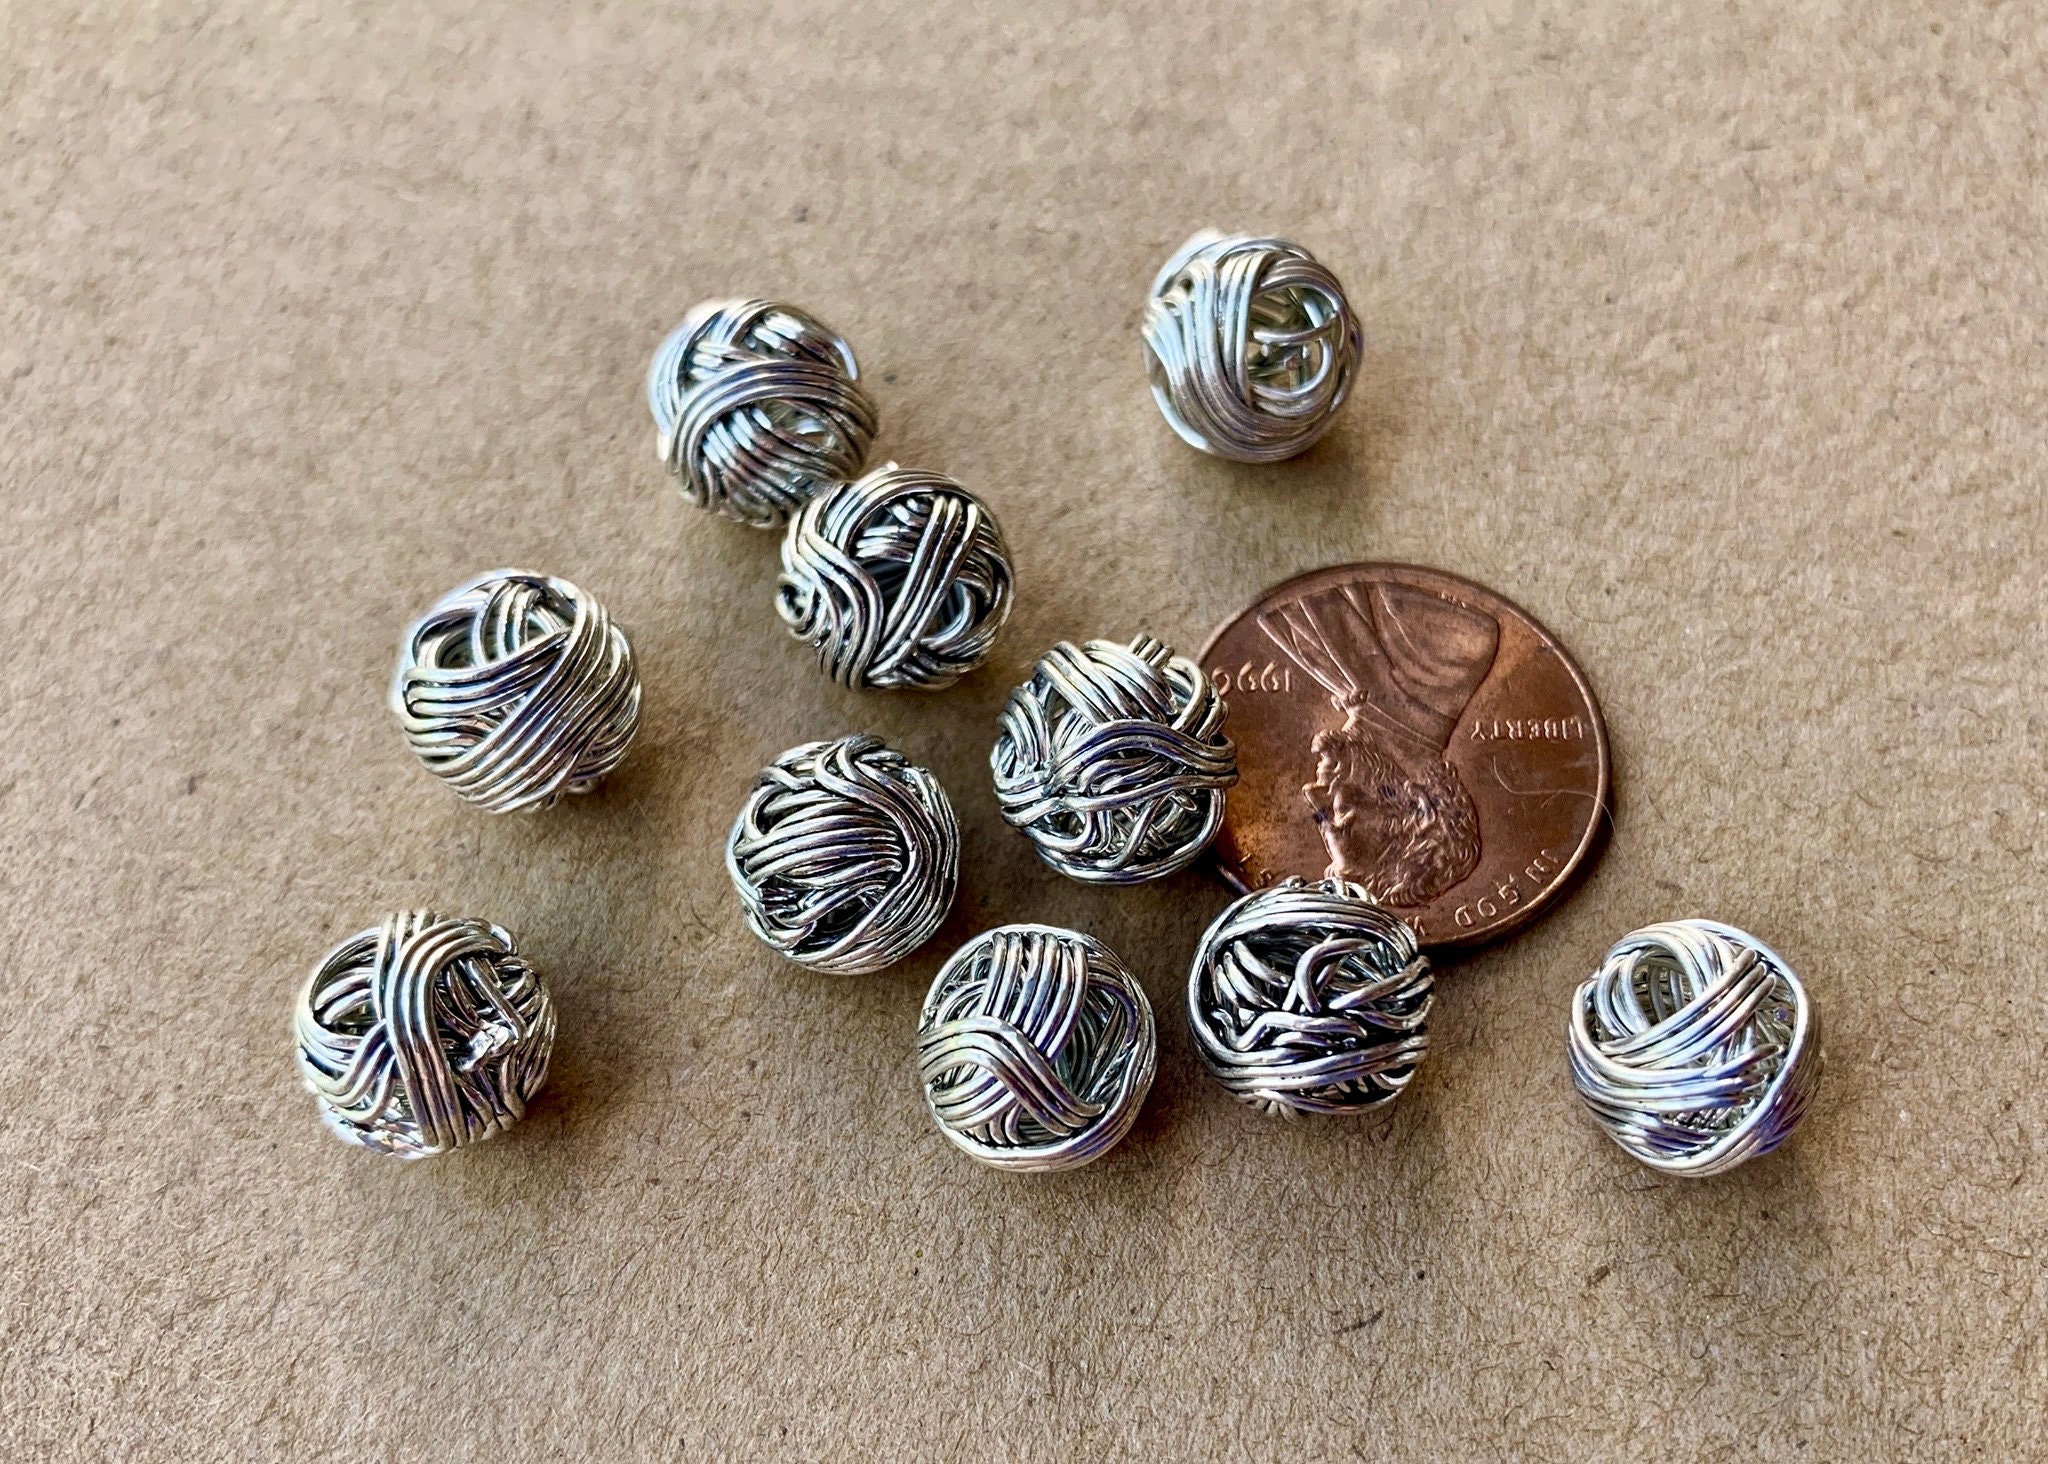 Very Interesting Coiled Wire Beads. Reminds Me of a Ball of Yarn